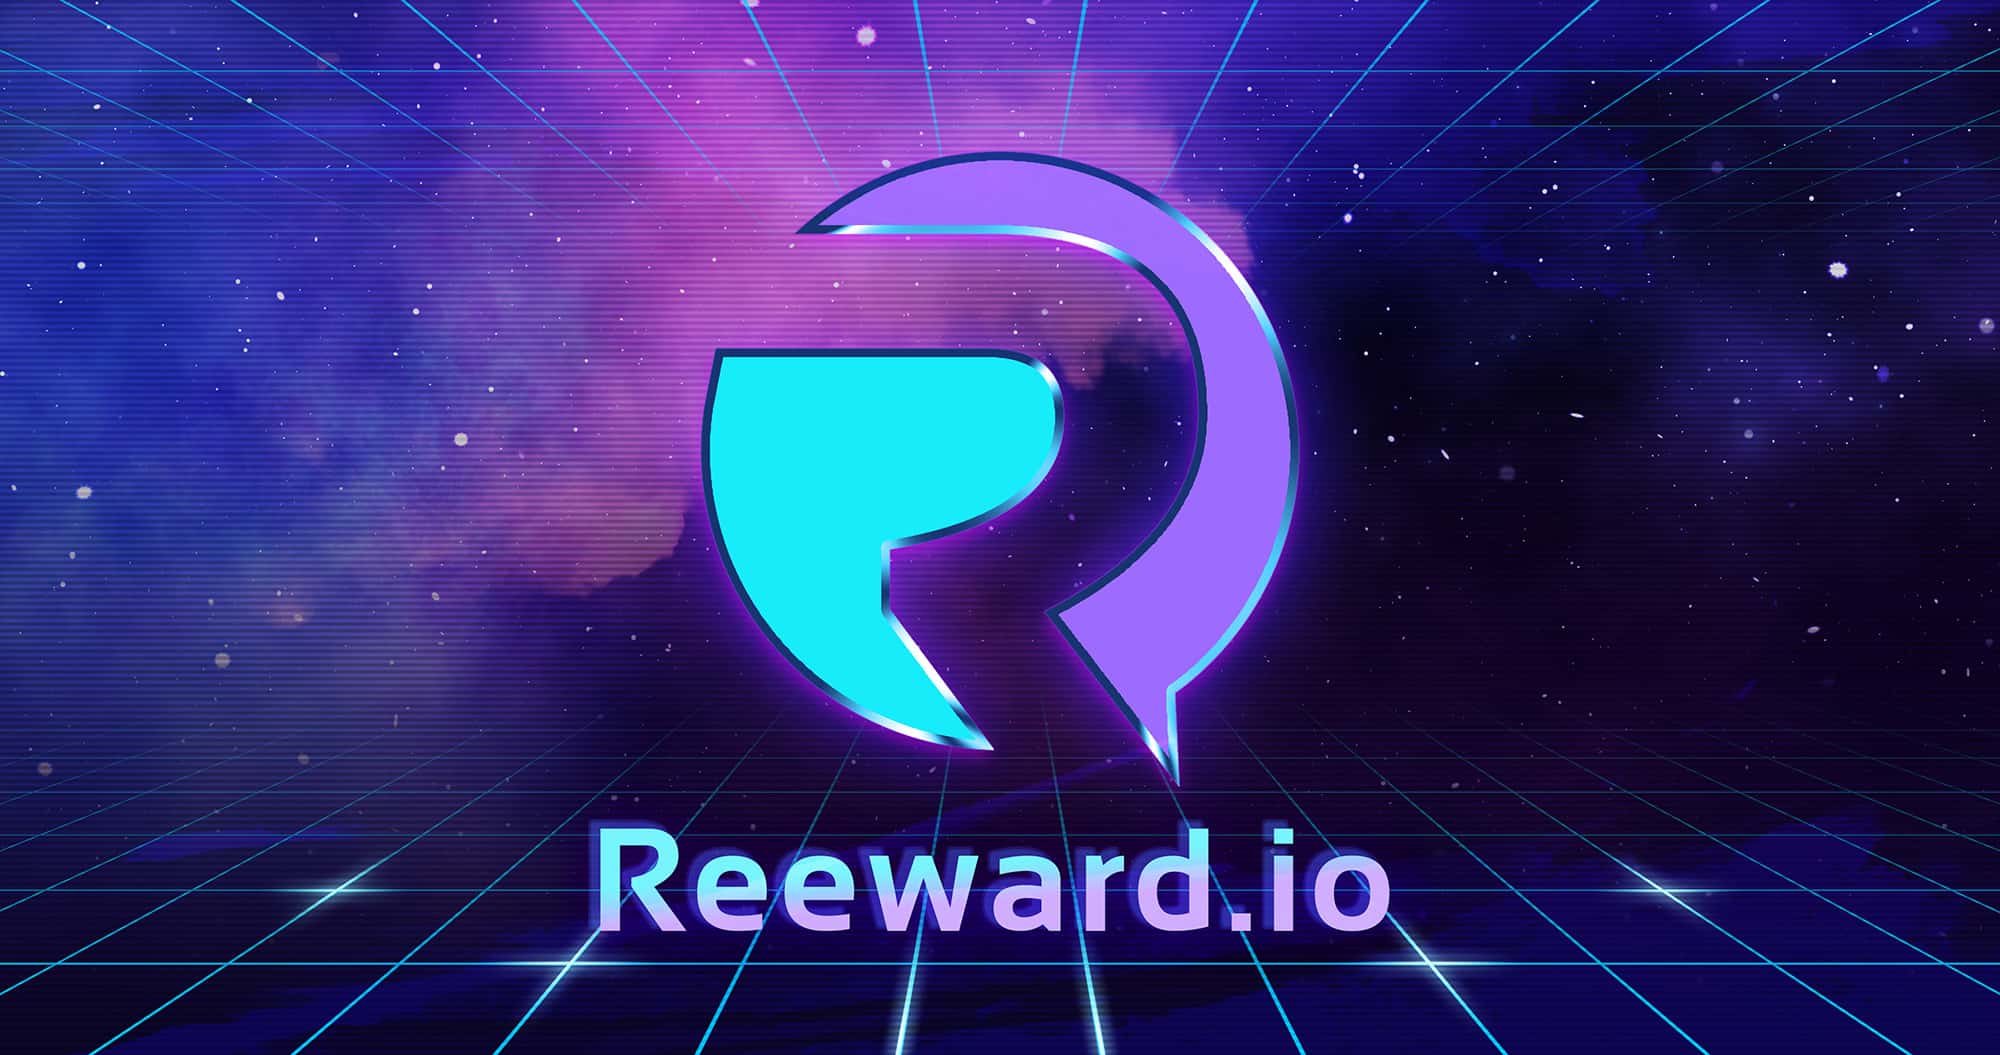 reewardio blockchain based rewards Rewards and loyalty points is a sector that can be enhanced using blockchain technology in ways we haven't imagine before. Surely, blockchain is not a fit for every industry but when it comes to rewarding loyal customers and engaged users, it makes perfect sense to use Reewardio's technology to improve user engagement and experience across almost all industries.